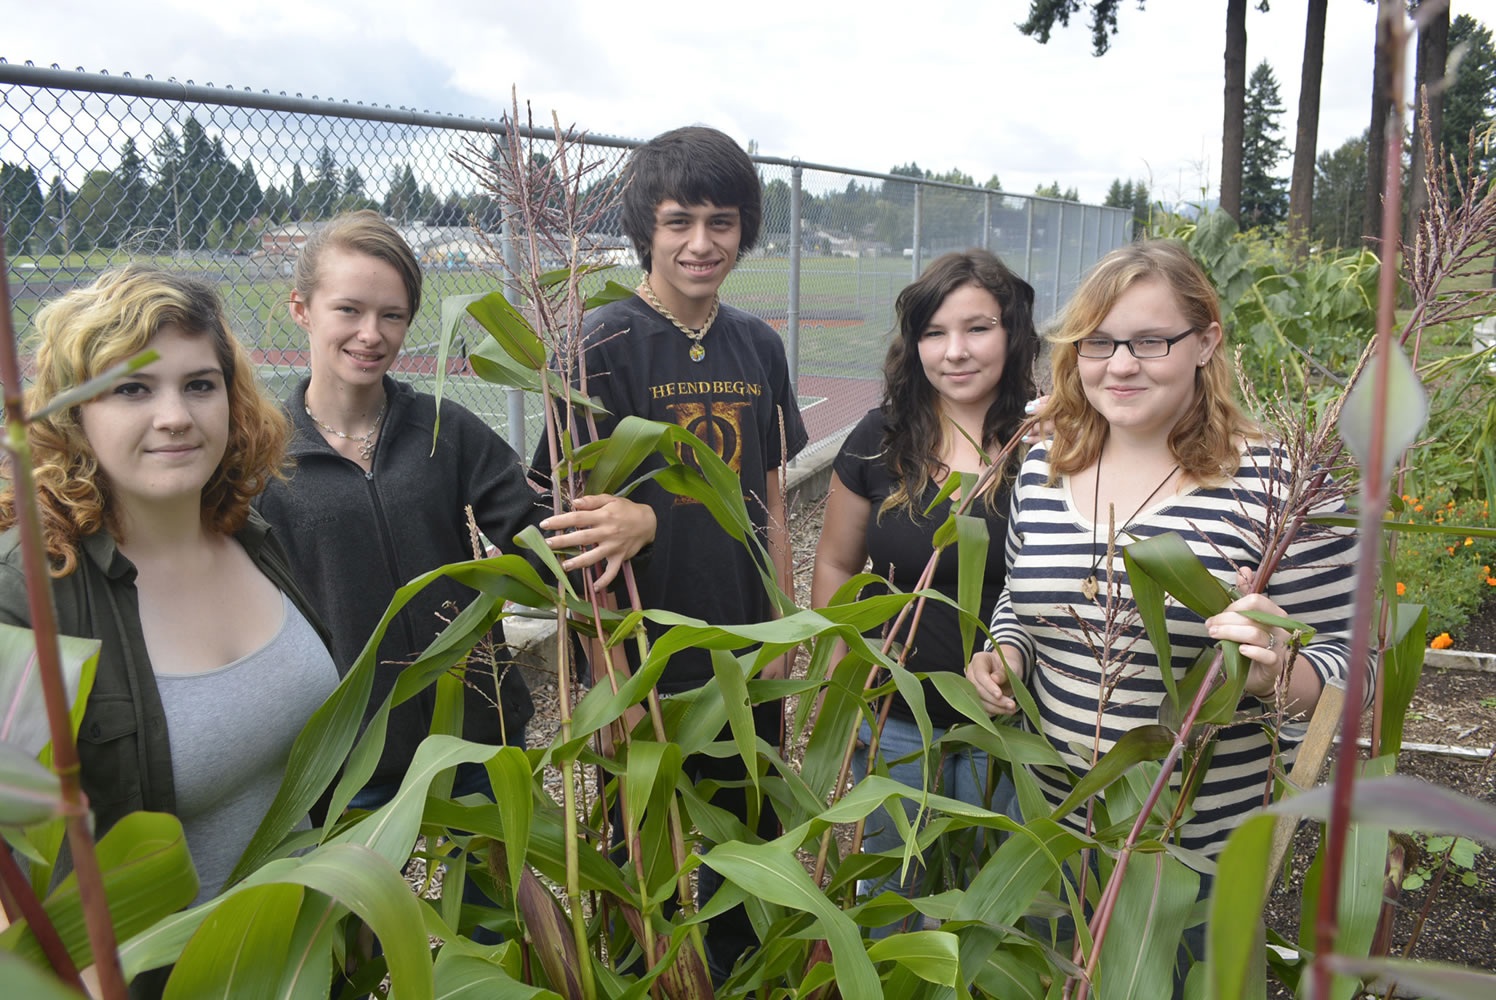 Washougal: Excelsior High School students Emily Head, from left, Qyuressa Zehner, Matt MacIntosh, Randee Schneider and Kayla Head get ready in mid-September to harvest the results of their efforts in the school's educational gardens.